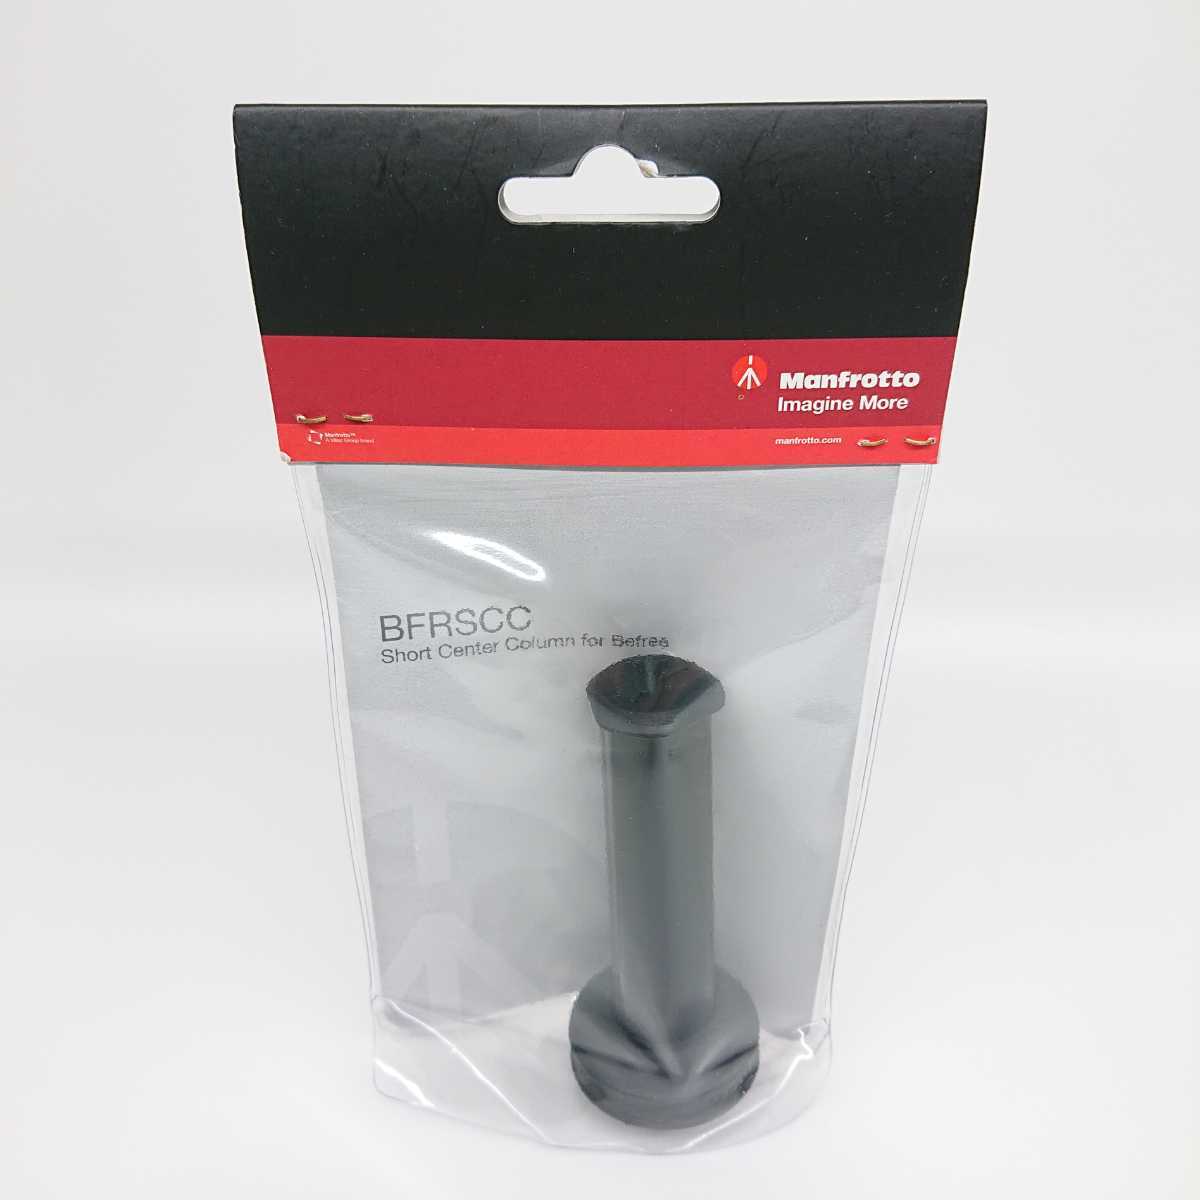 Manfrotto BFRSCC CENTER COLUMN SHORT FOR BEFREE Made in Italy befree用 マンフロット ショートセンターポール ☆ 未使用品 送料無料 ☆